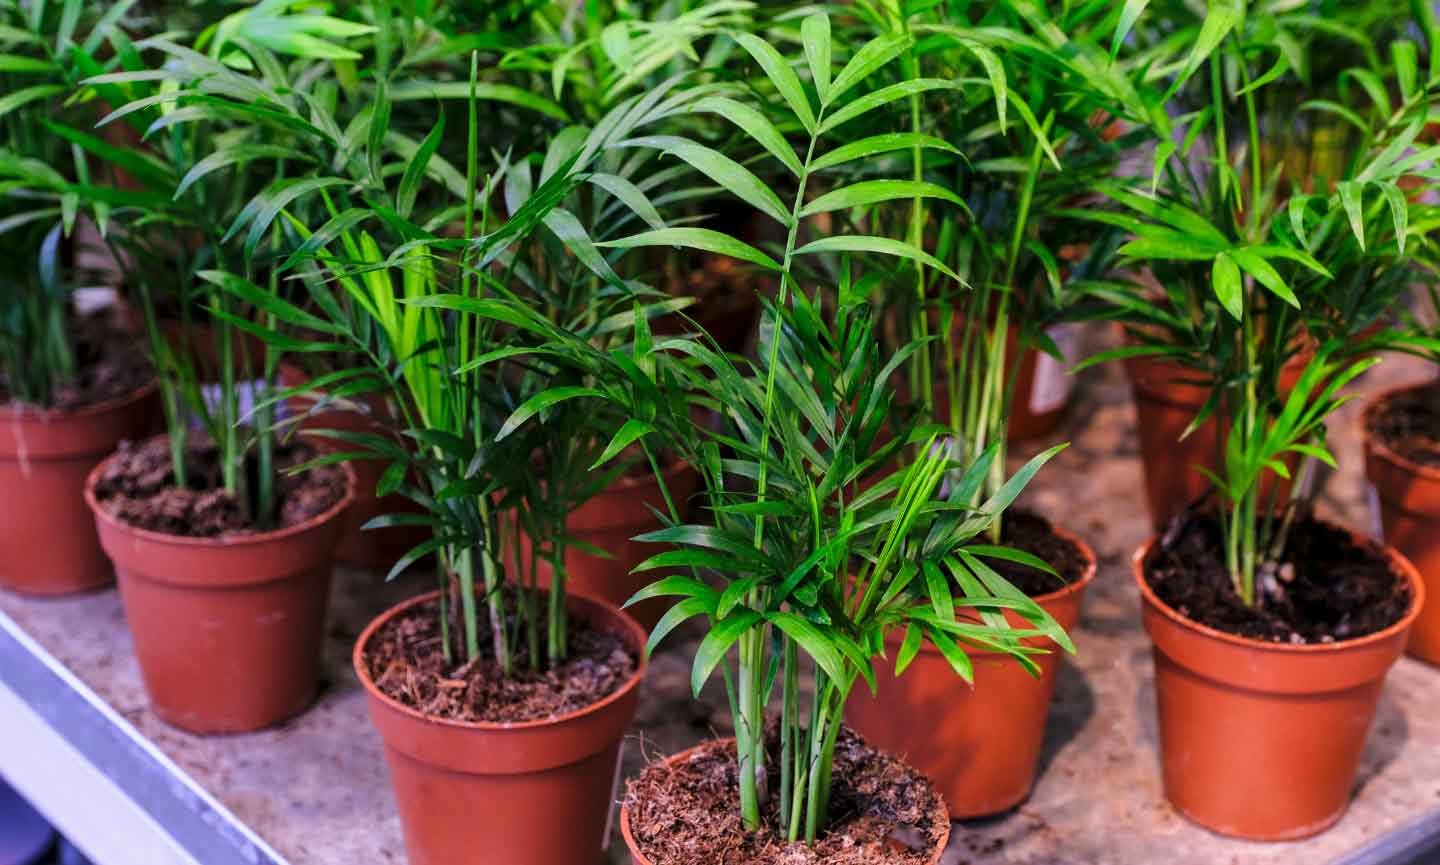 A collection of potted parlor palm plants